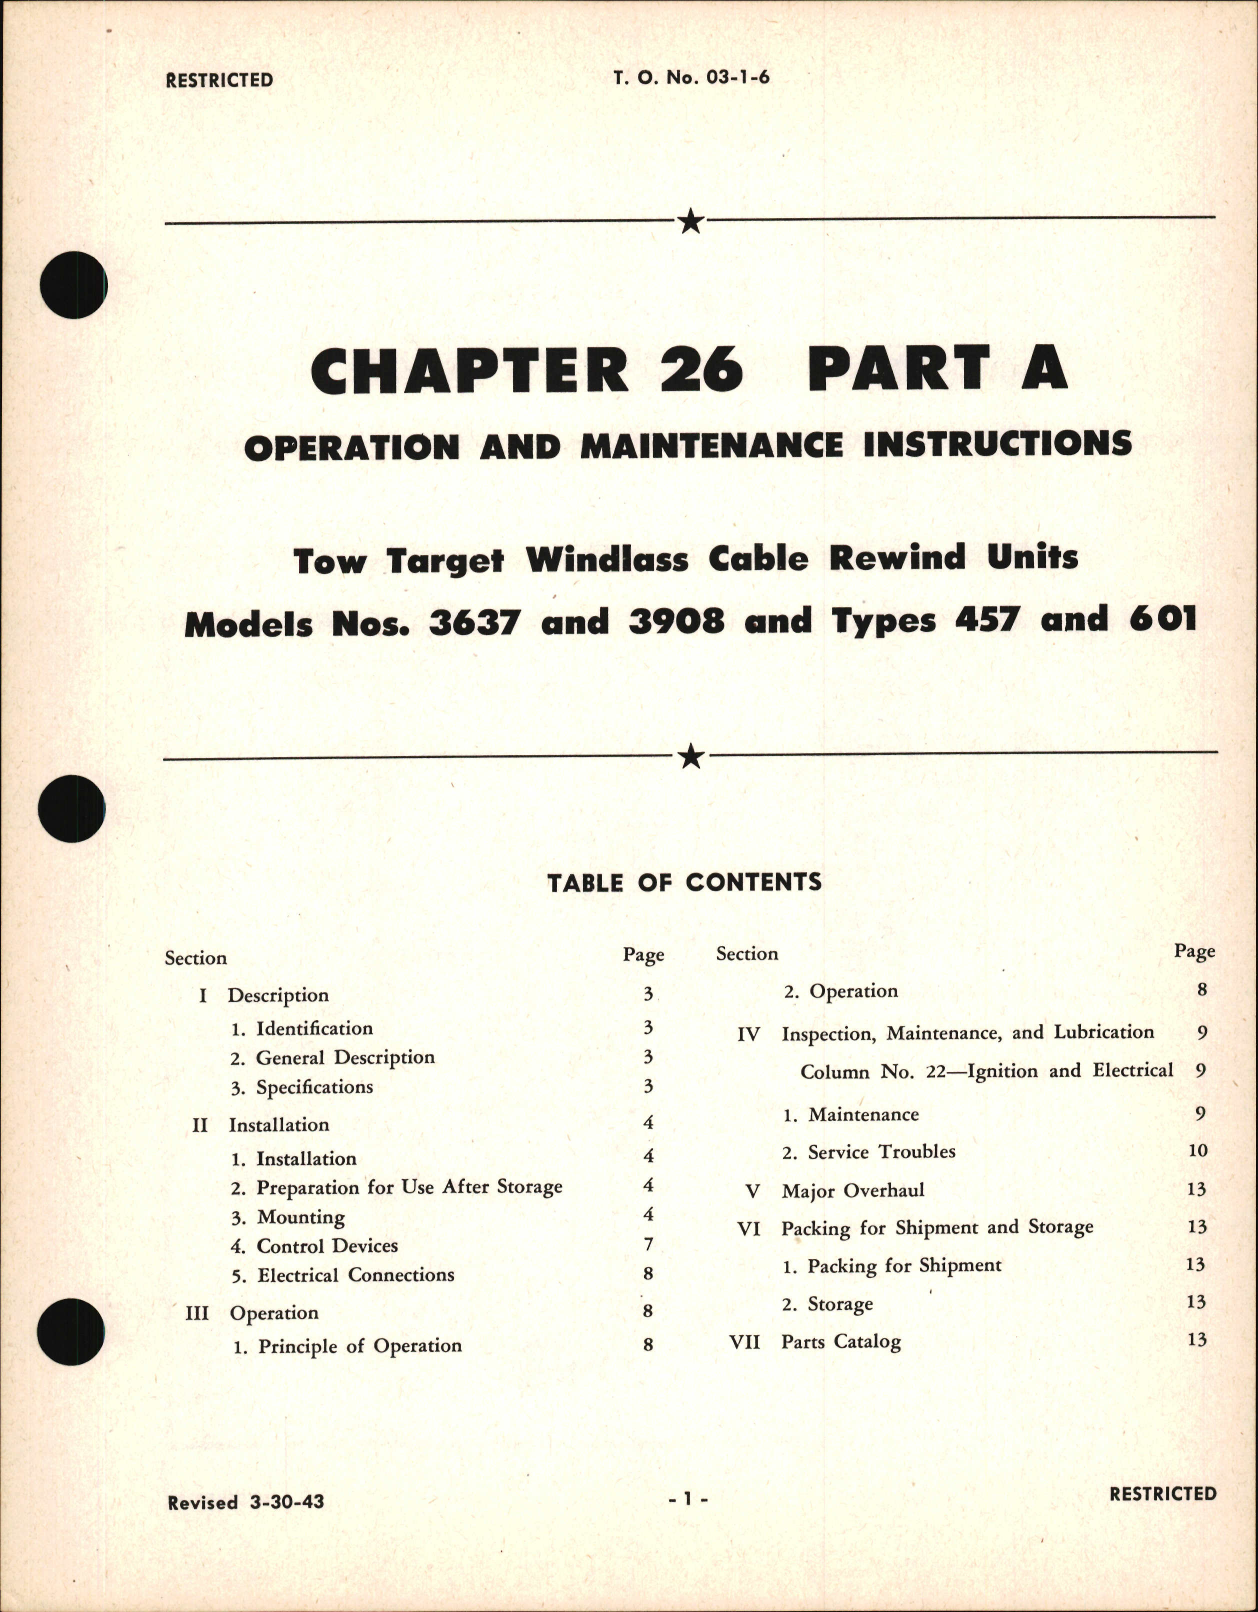 Sample page 1 from AirCorps Library document: Operation and Maintenance Instructions for Tow Target Windlass Cable Rewind Units